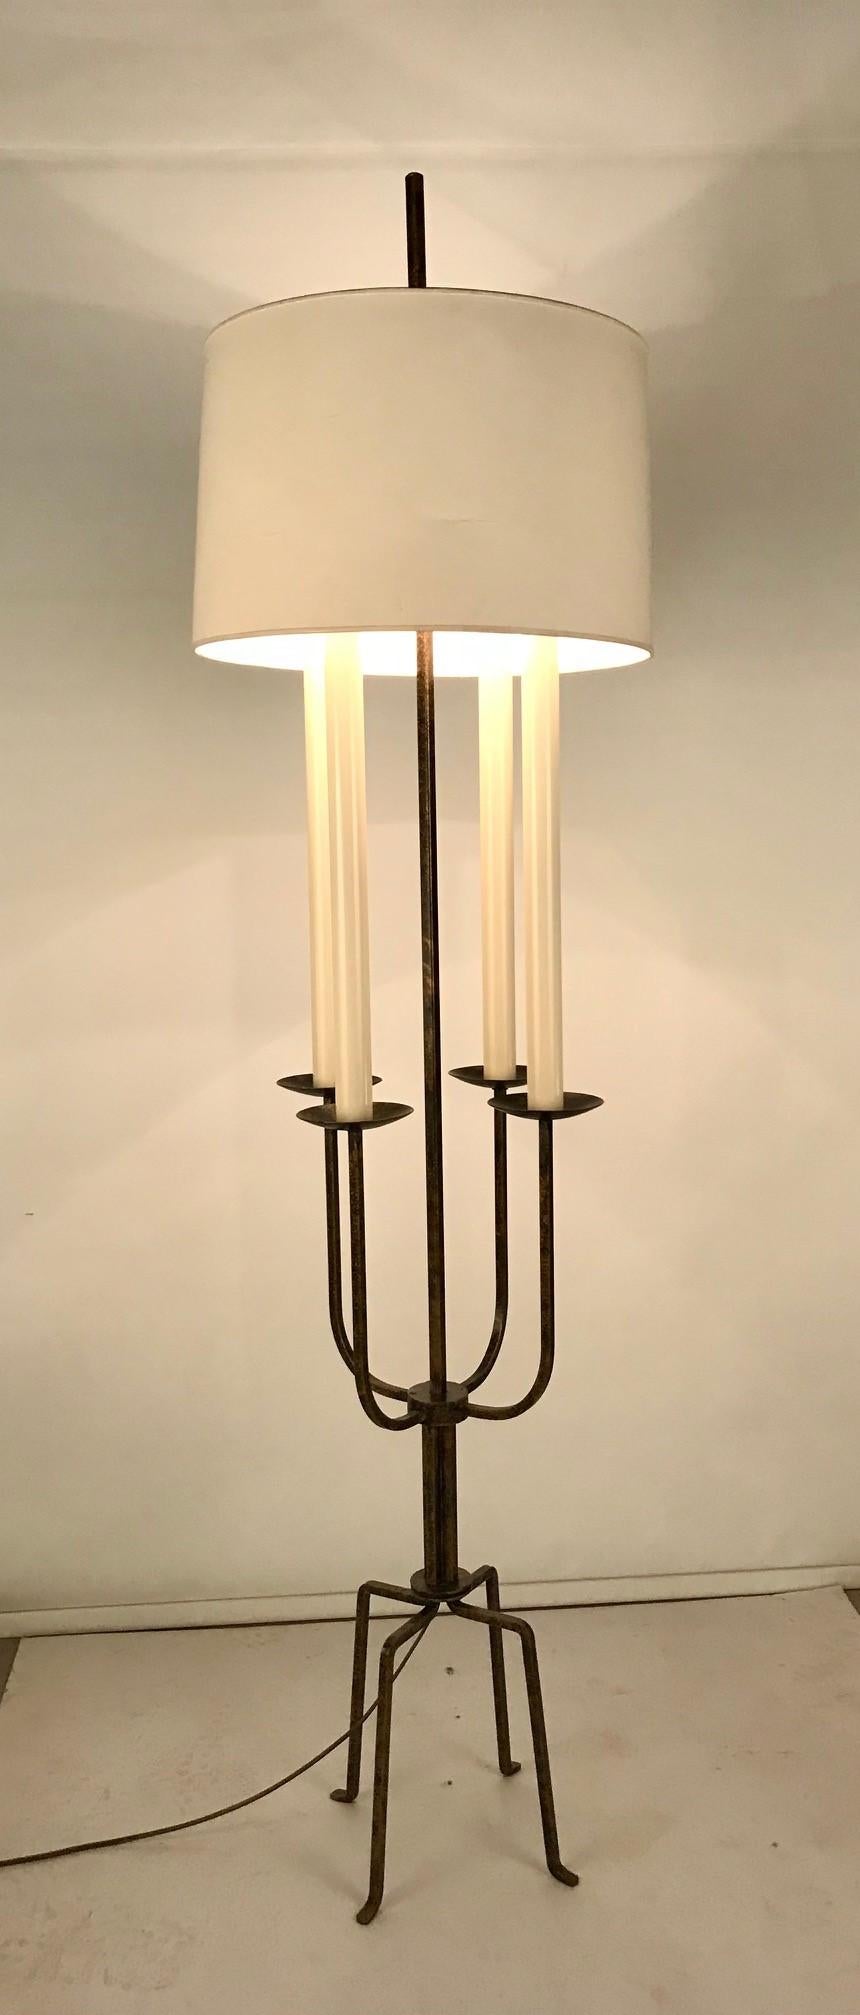 Elegant Vintage pair of floor lamps, designed by Tommi Parzinger, American, circa 1950s. They retains their original lightly gilded over black iron patinated painted finish with original patina. They have been rewired to UL standards. A rare true